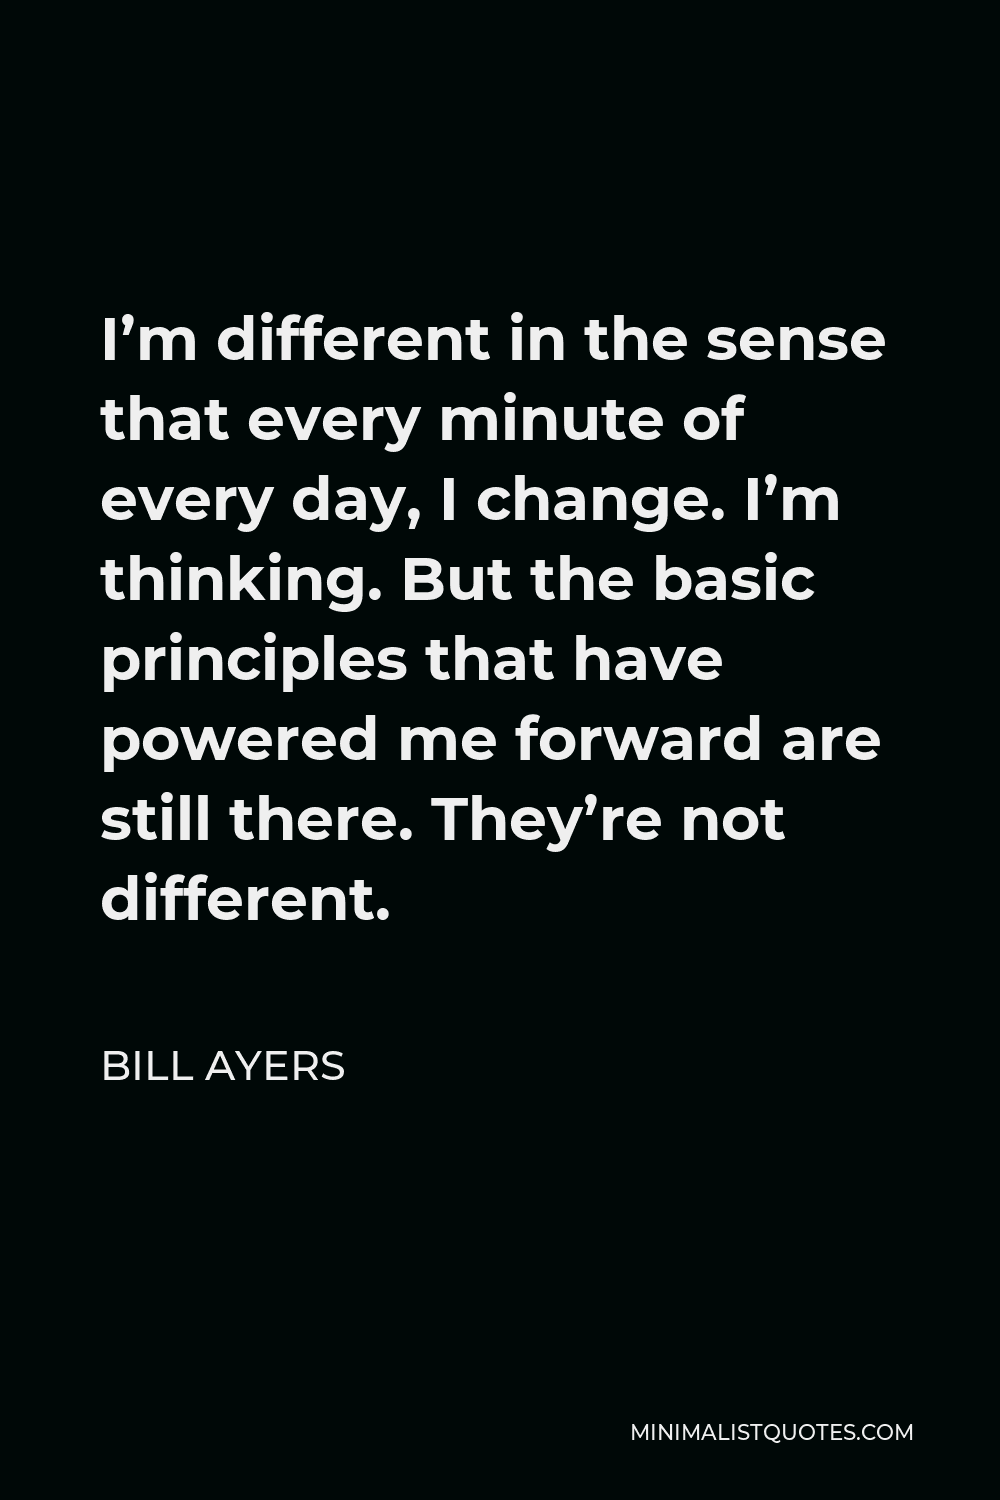 Bill Ayers Quote - I’m different in the sense that every minute of every day, I change. I’m thinking. But the basic principles that have powered me forward are still there. They’re not different.